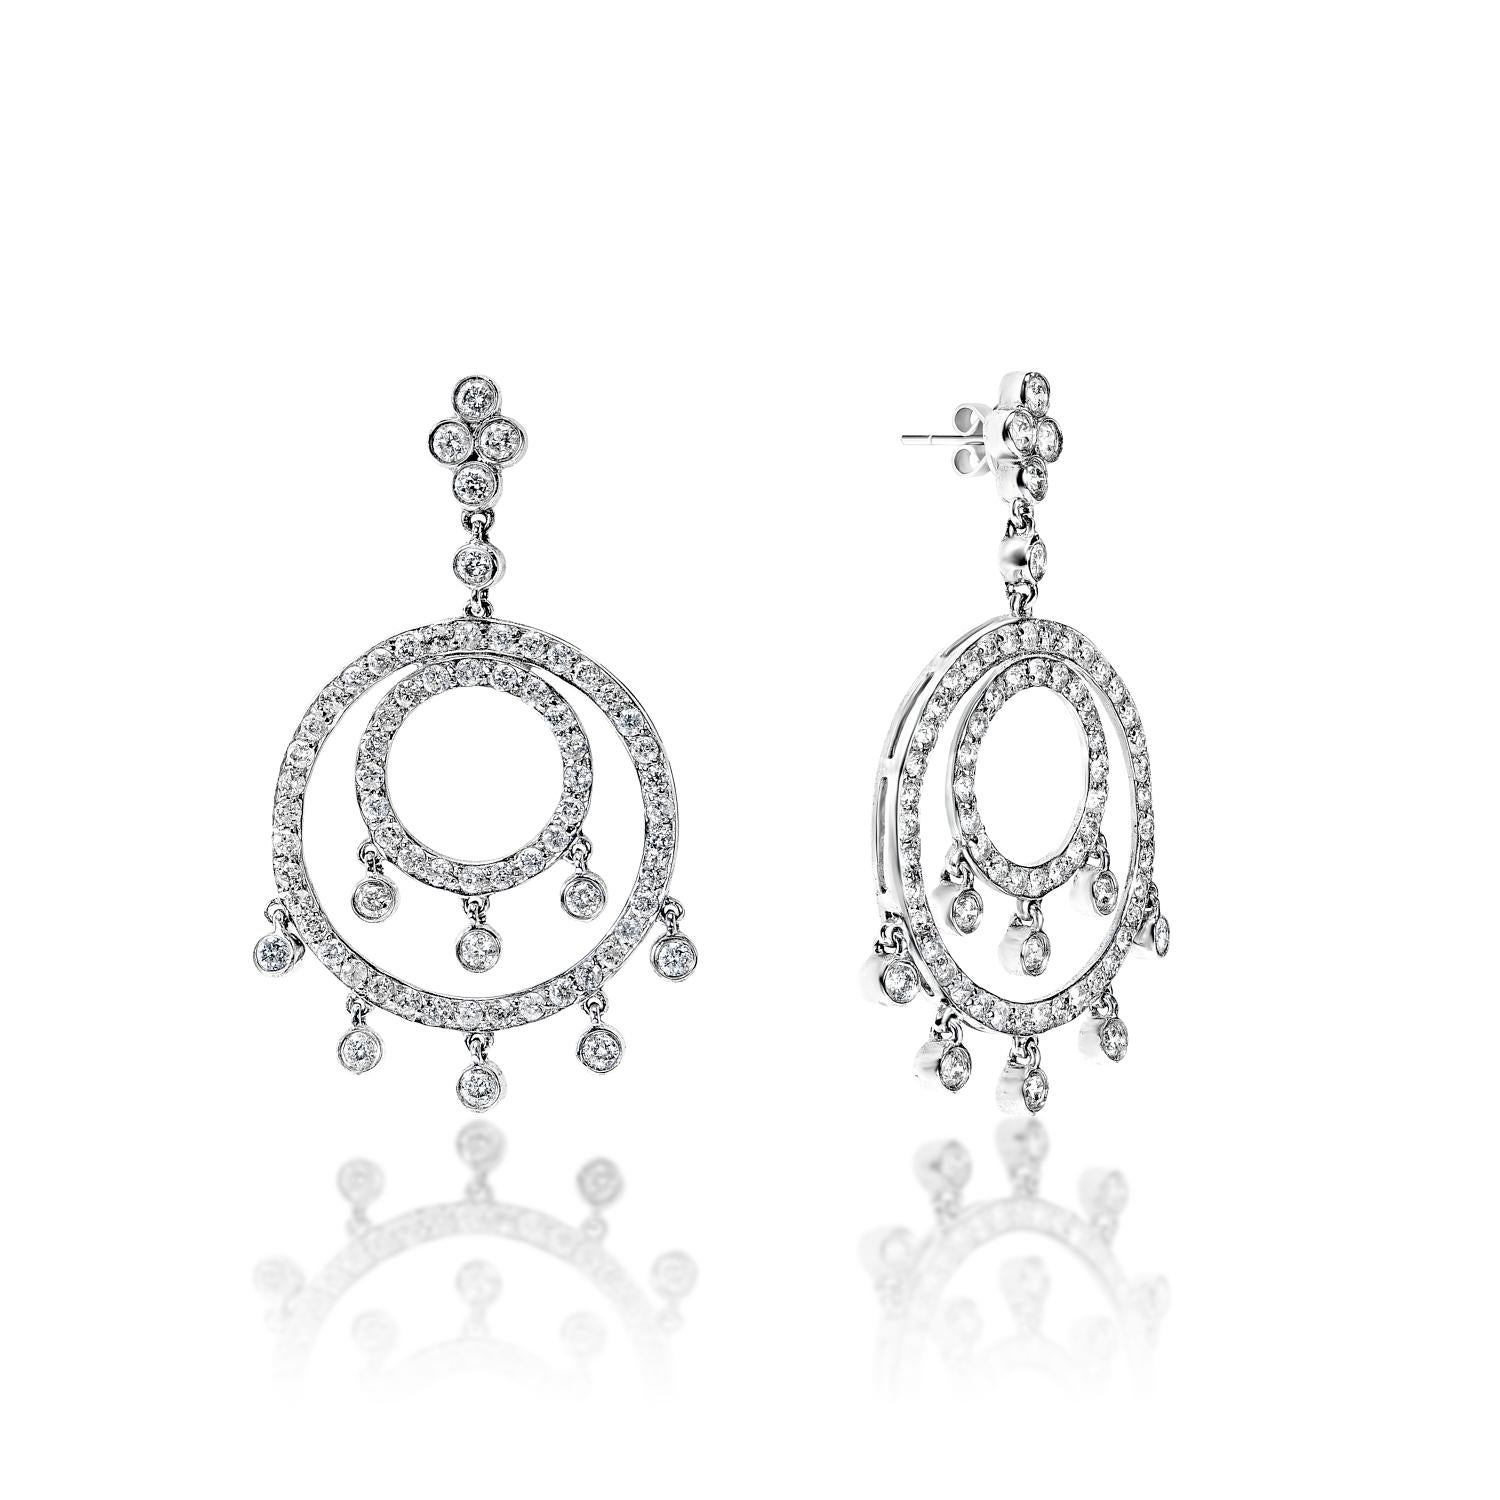 Round Cut 2 Carat Round Brilliant Diamond Hanging Earrings Certified For Sale